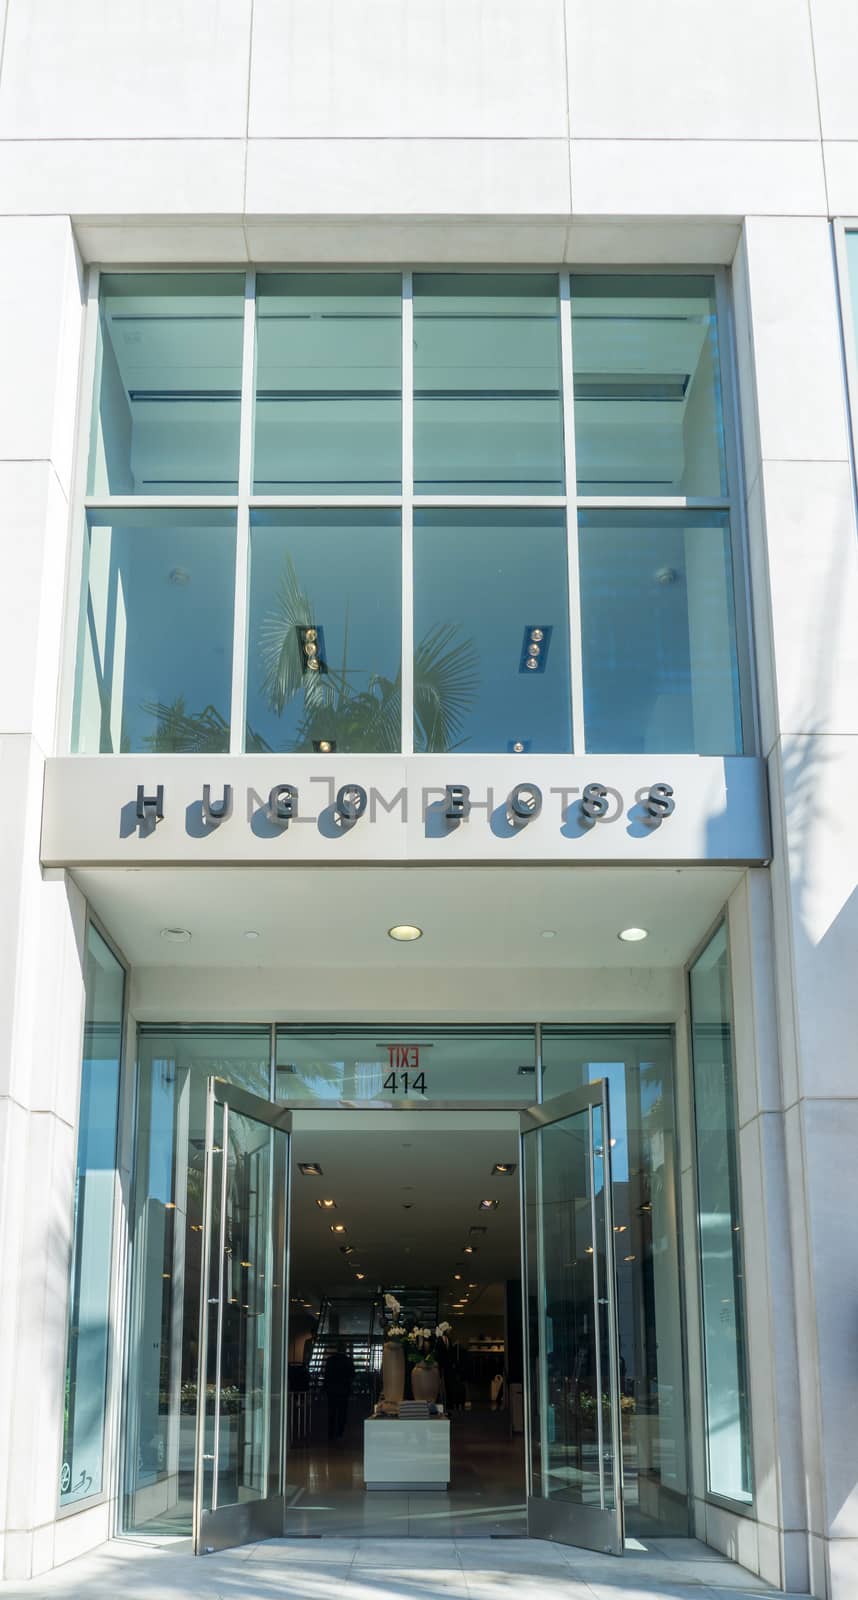 BEVERLY HILLS, CA/USA - JANUARY 3, 2015: Hugo Boss retail store exterior. Hugo Boss is a German luxury fashion and style house named after its founder Hugo Boss.